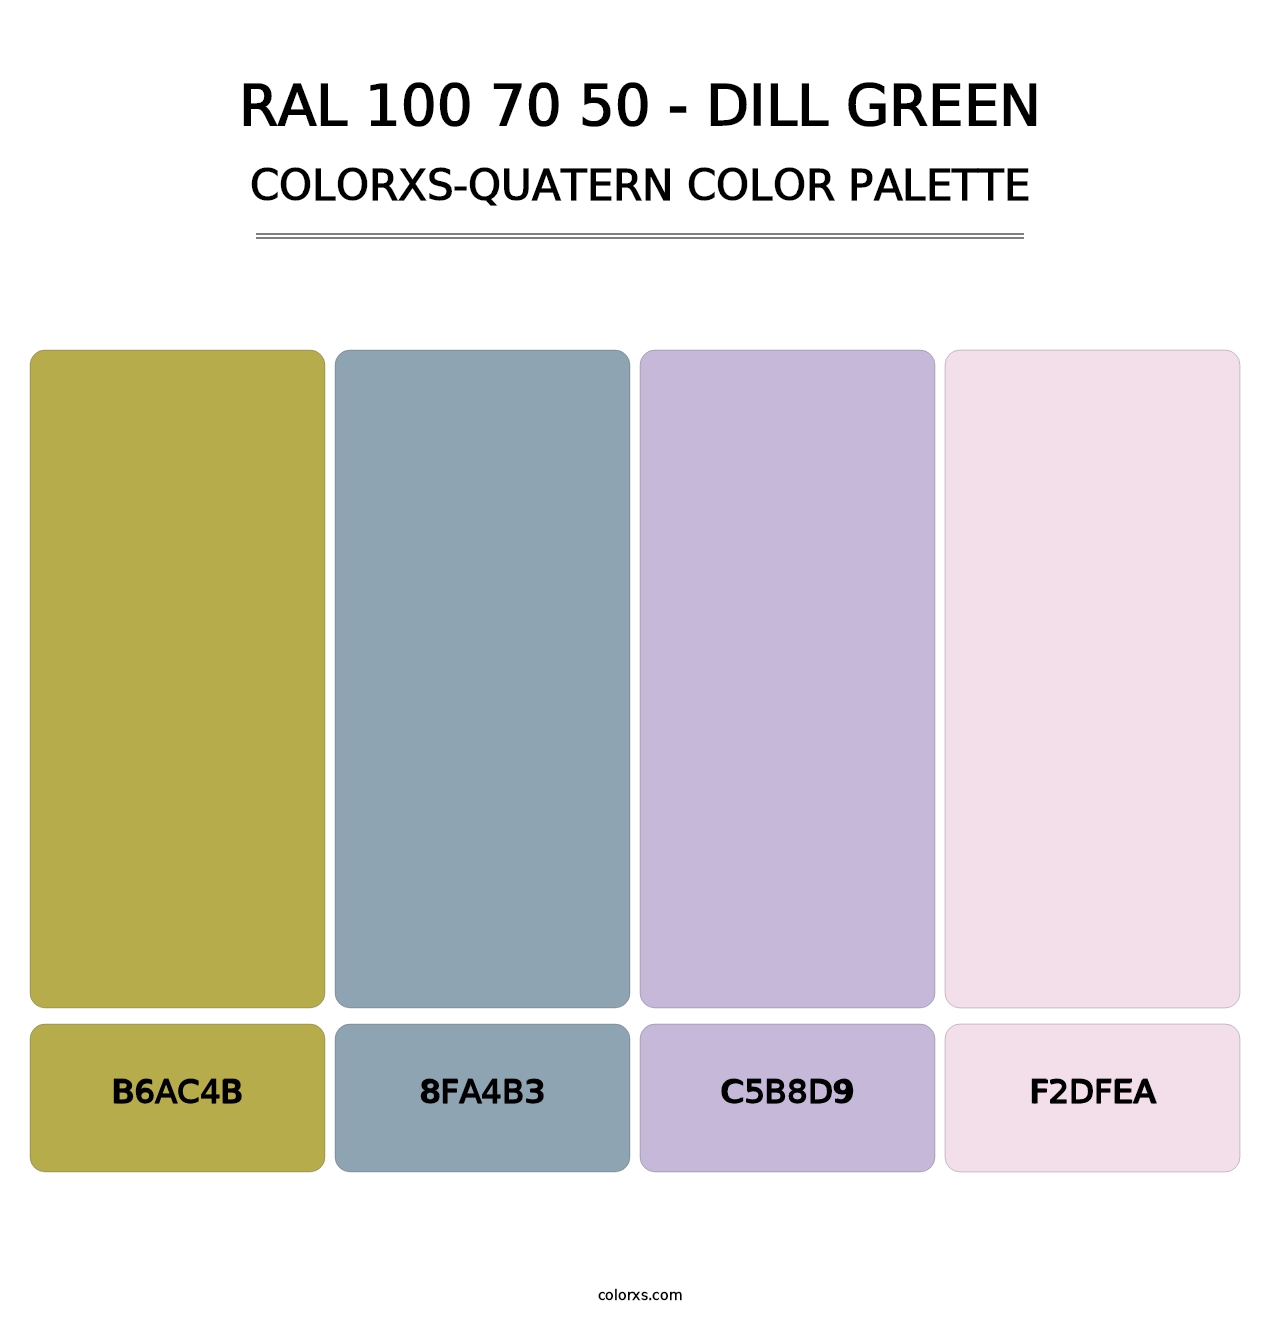 RAL 100 70 50 - Dill Green - Colorxs Quatern Palette